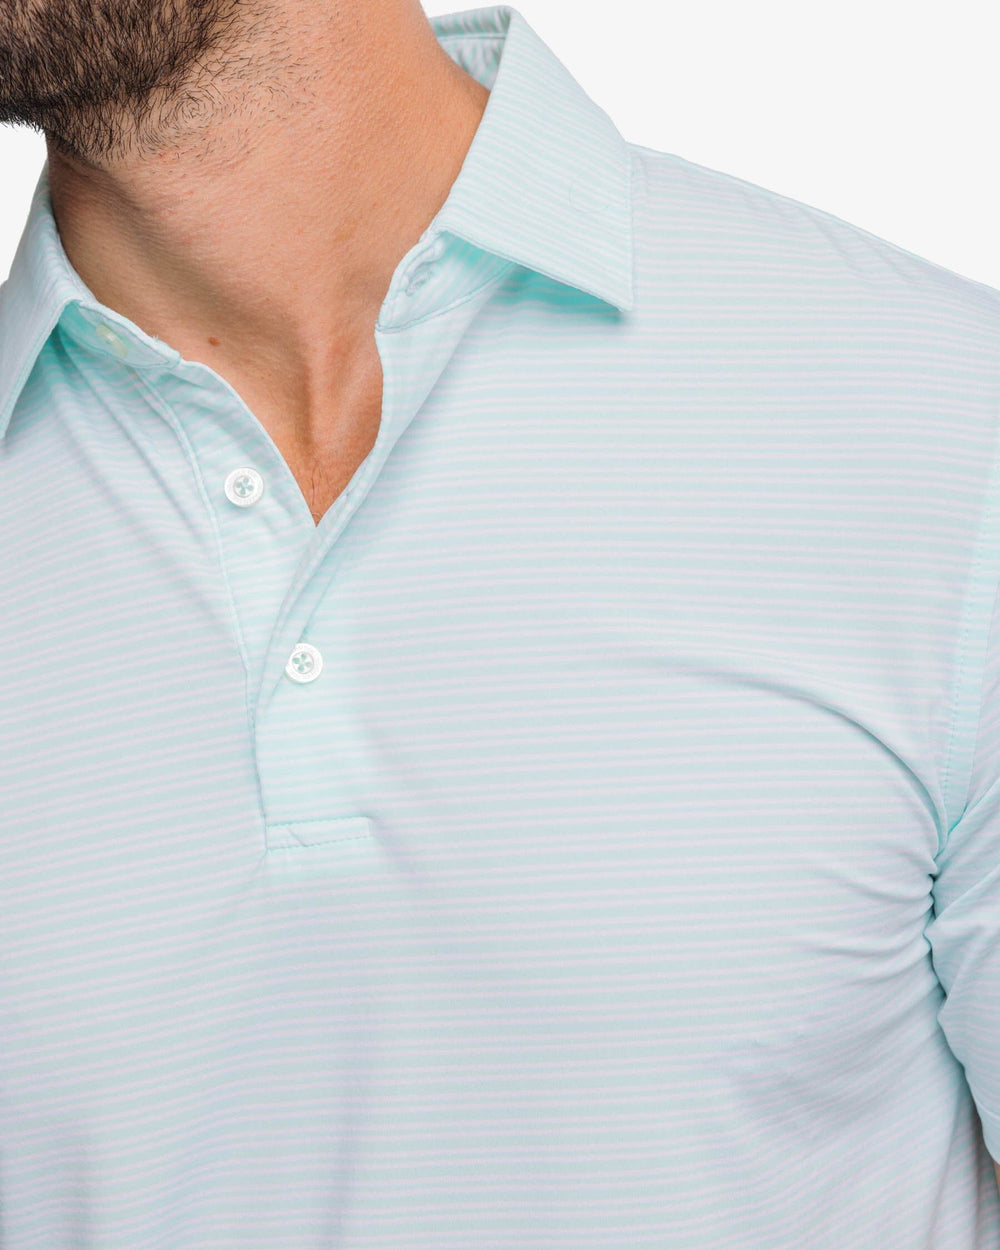 The detail view of the Southern Tide brrr-eeze Millwood Stripe Performance Polo Shirt by Southern Tide - Baltic Teal